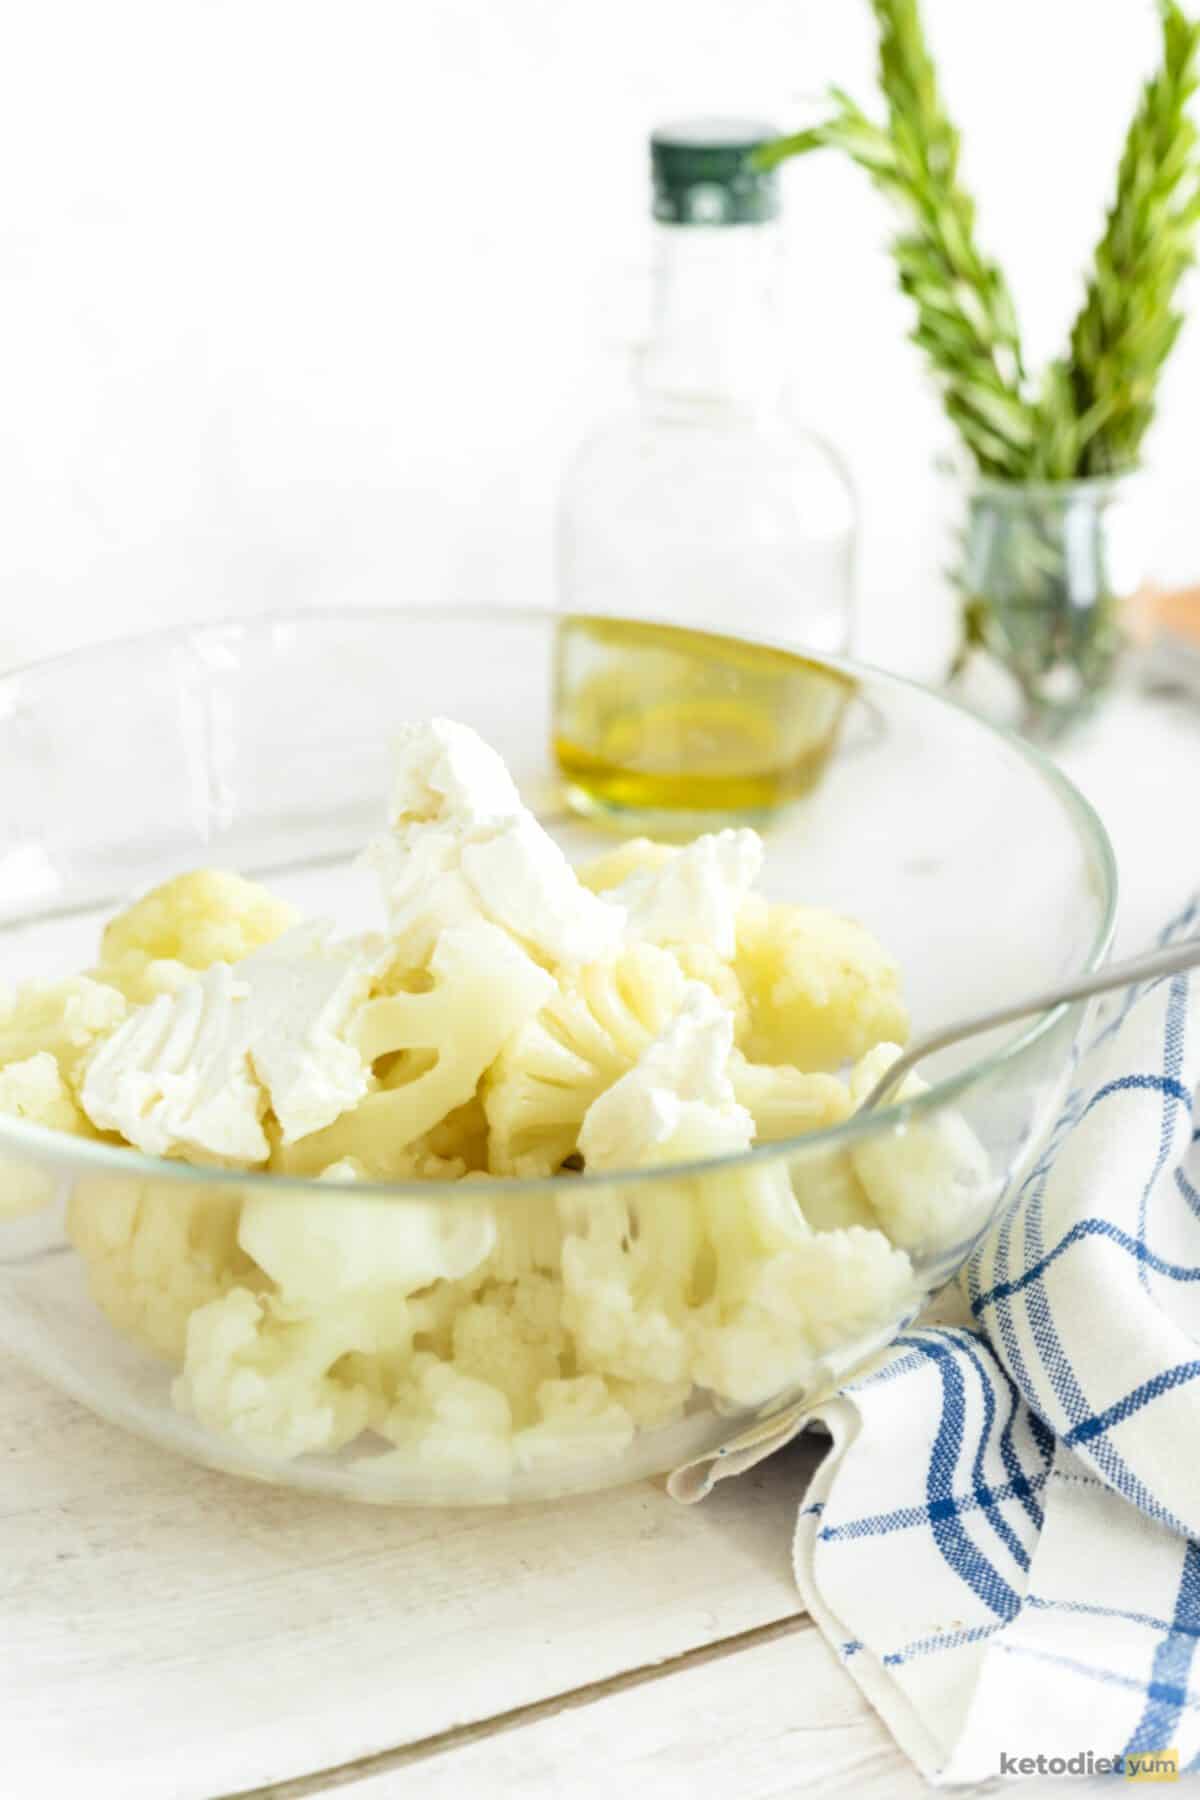 Glass bowl of cauliflower florets with a spoon inside and a kitchen towel underneath with a bottle of olive oil and jar of rosemary sprigs in the background